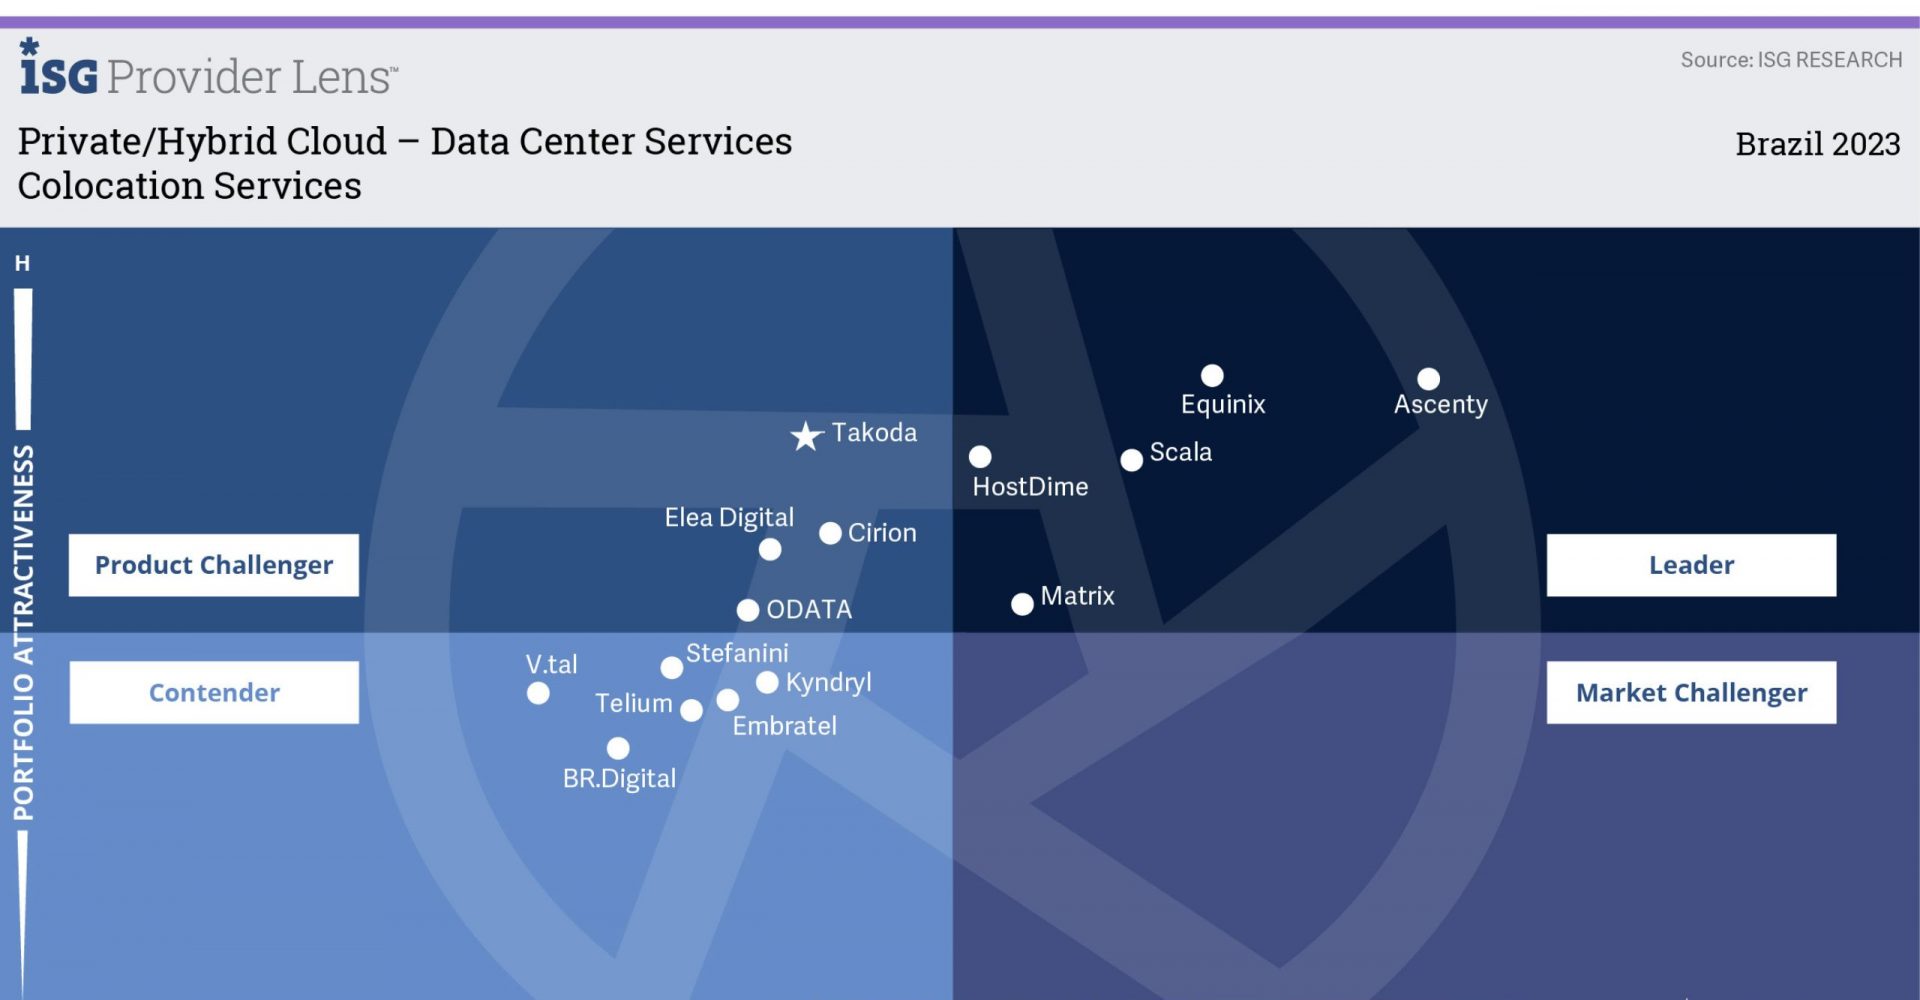 Ascenty tops the ISG Provider Lens™ Colocation Quadrant in Brazil for the fourth consecutive year